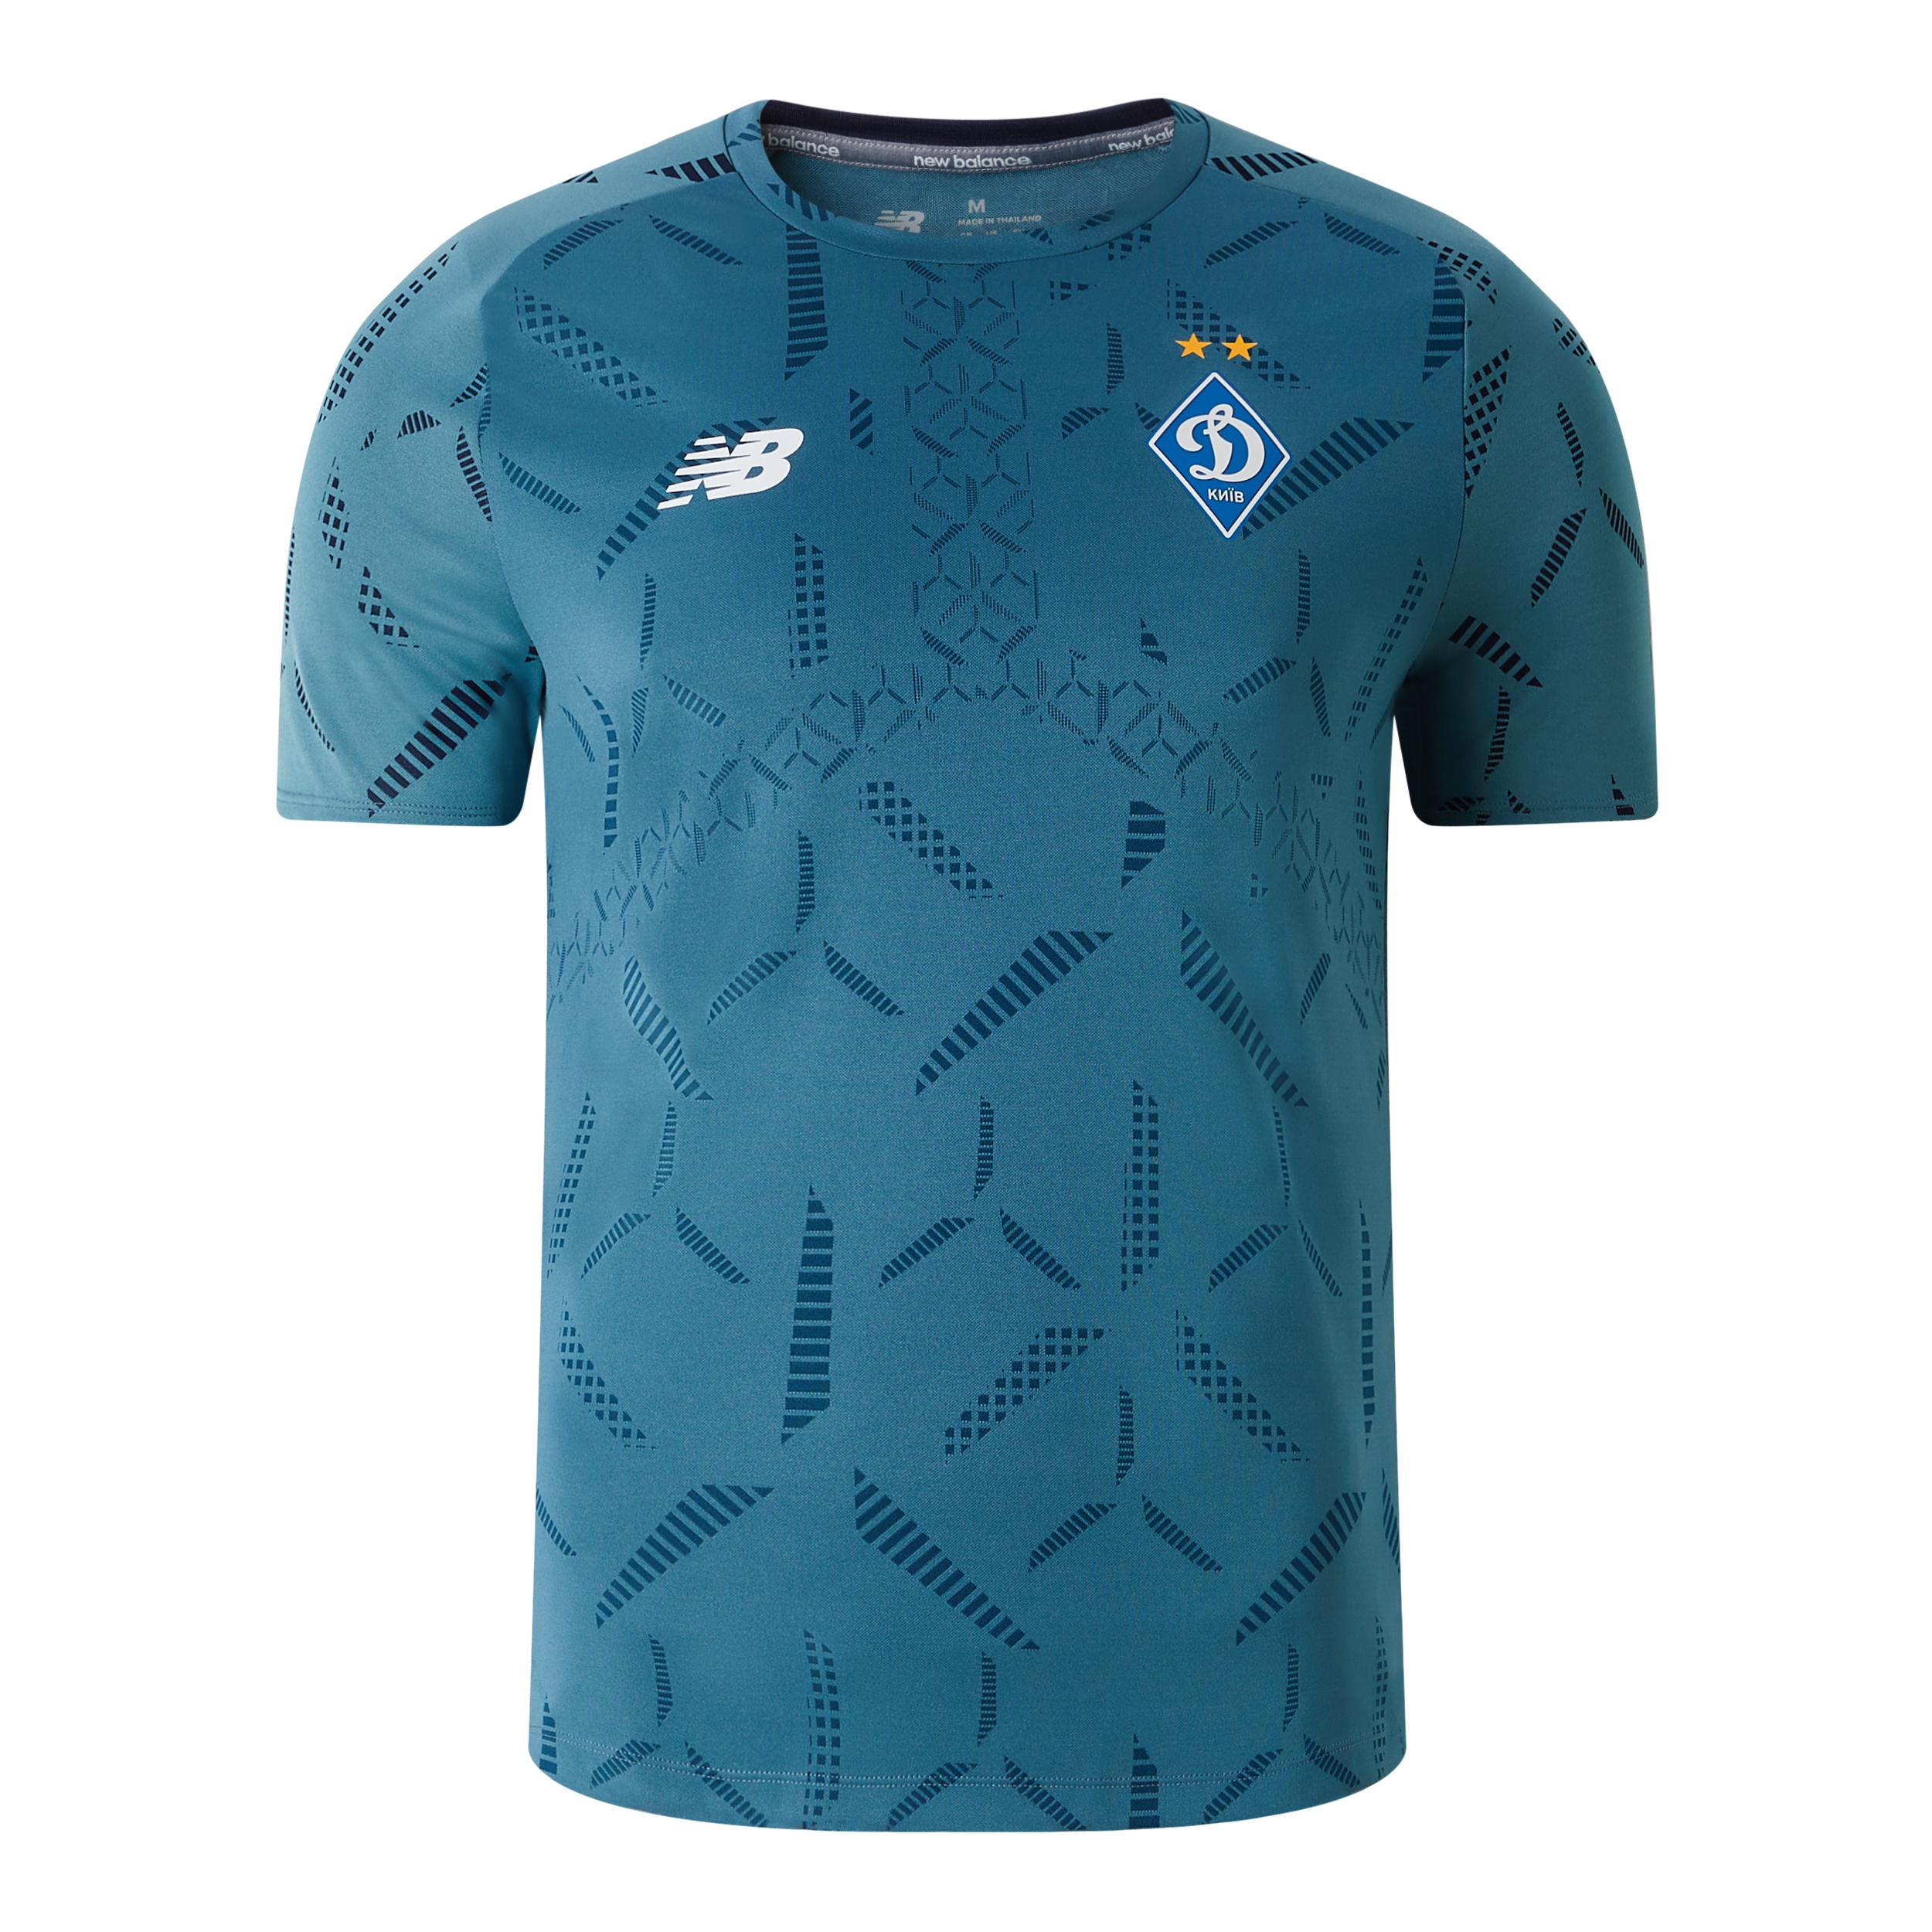 FCDK official training T-shirt.Material - 100% polyester. Colour:blue